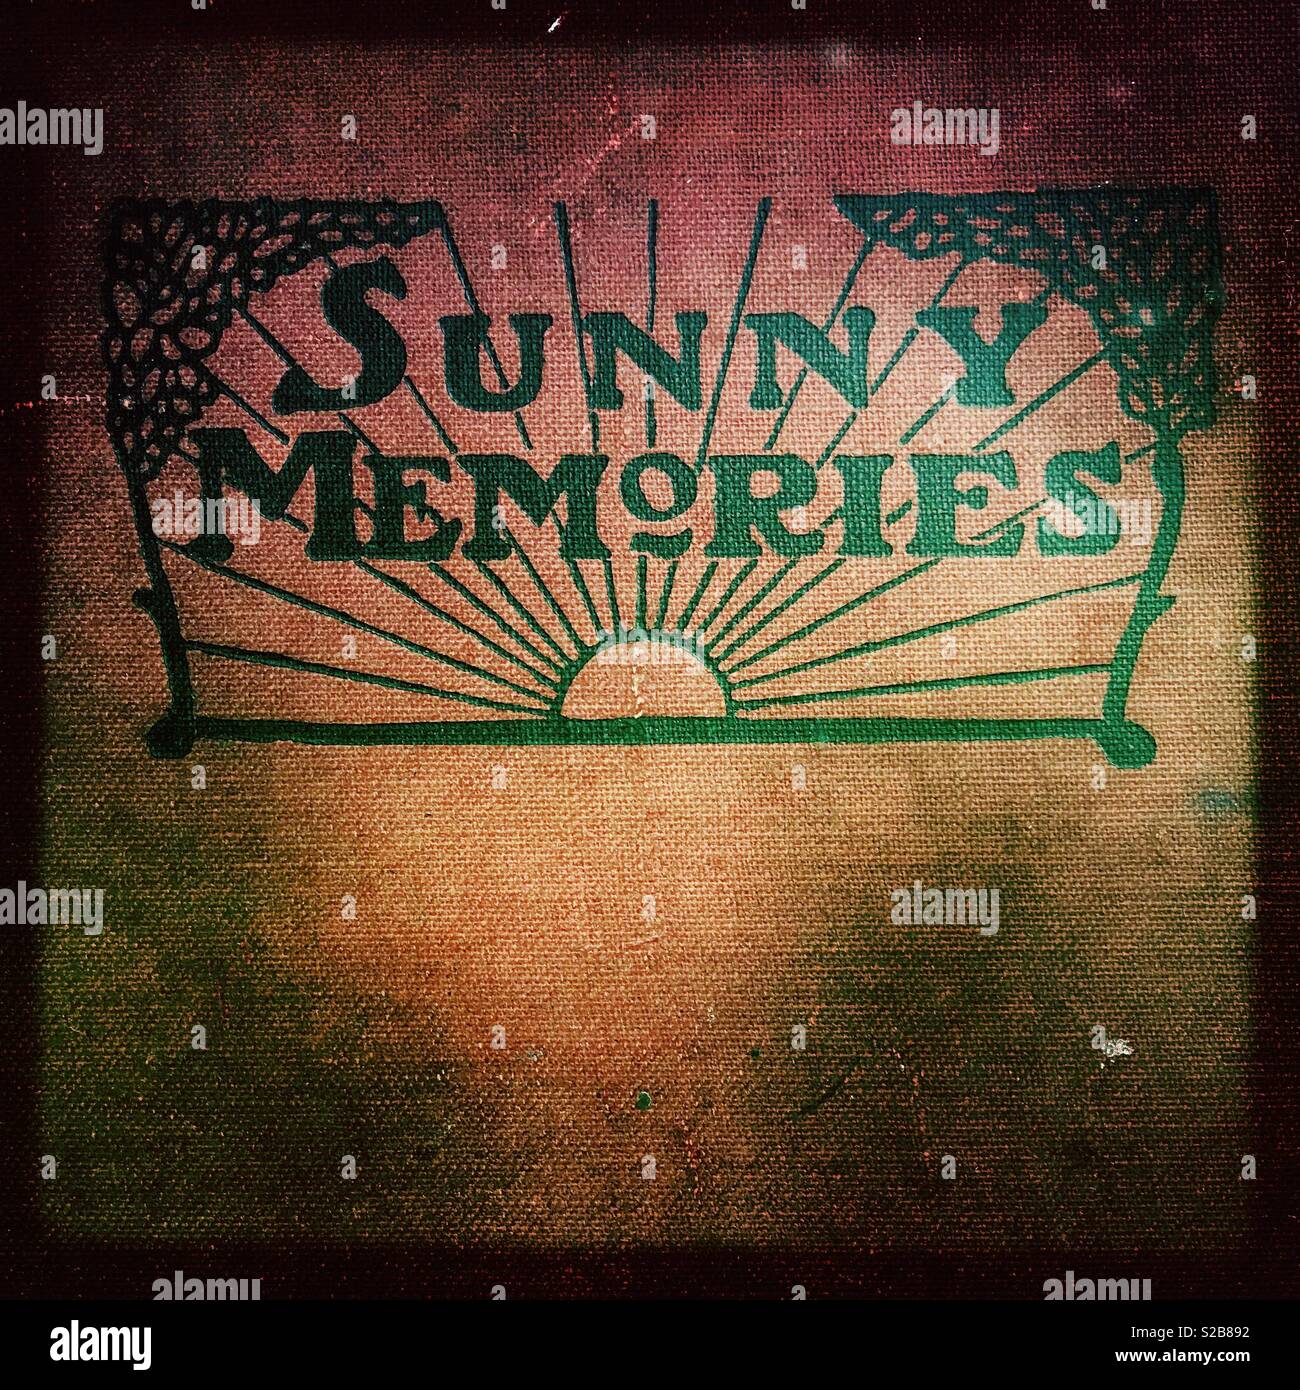 Old photograph album with the title Sunny Memories. Stock Photo